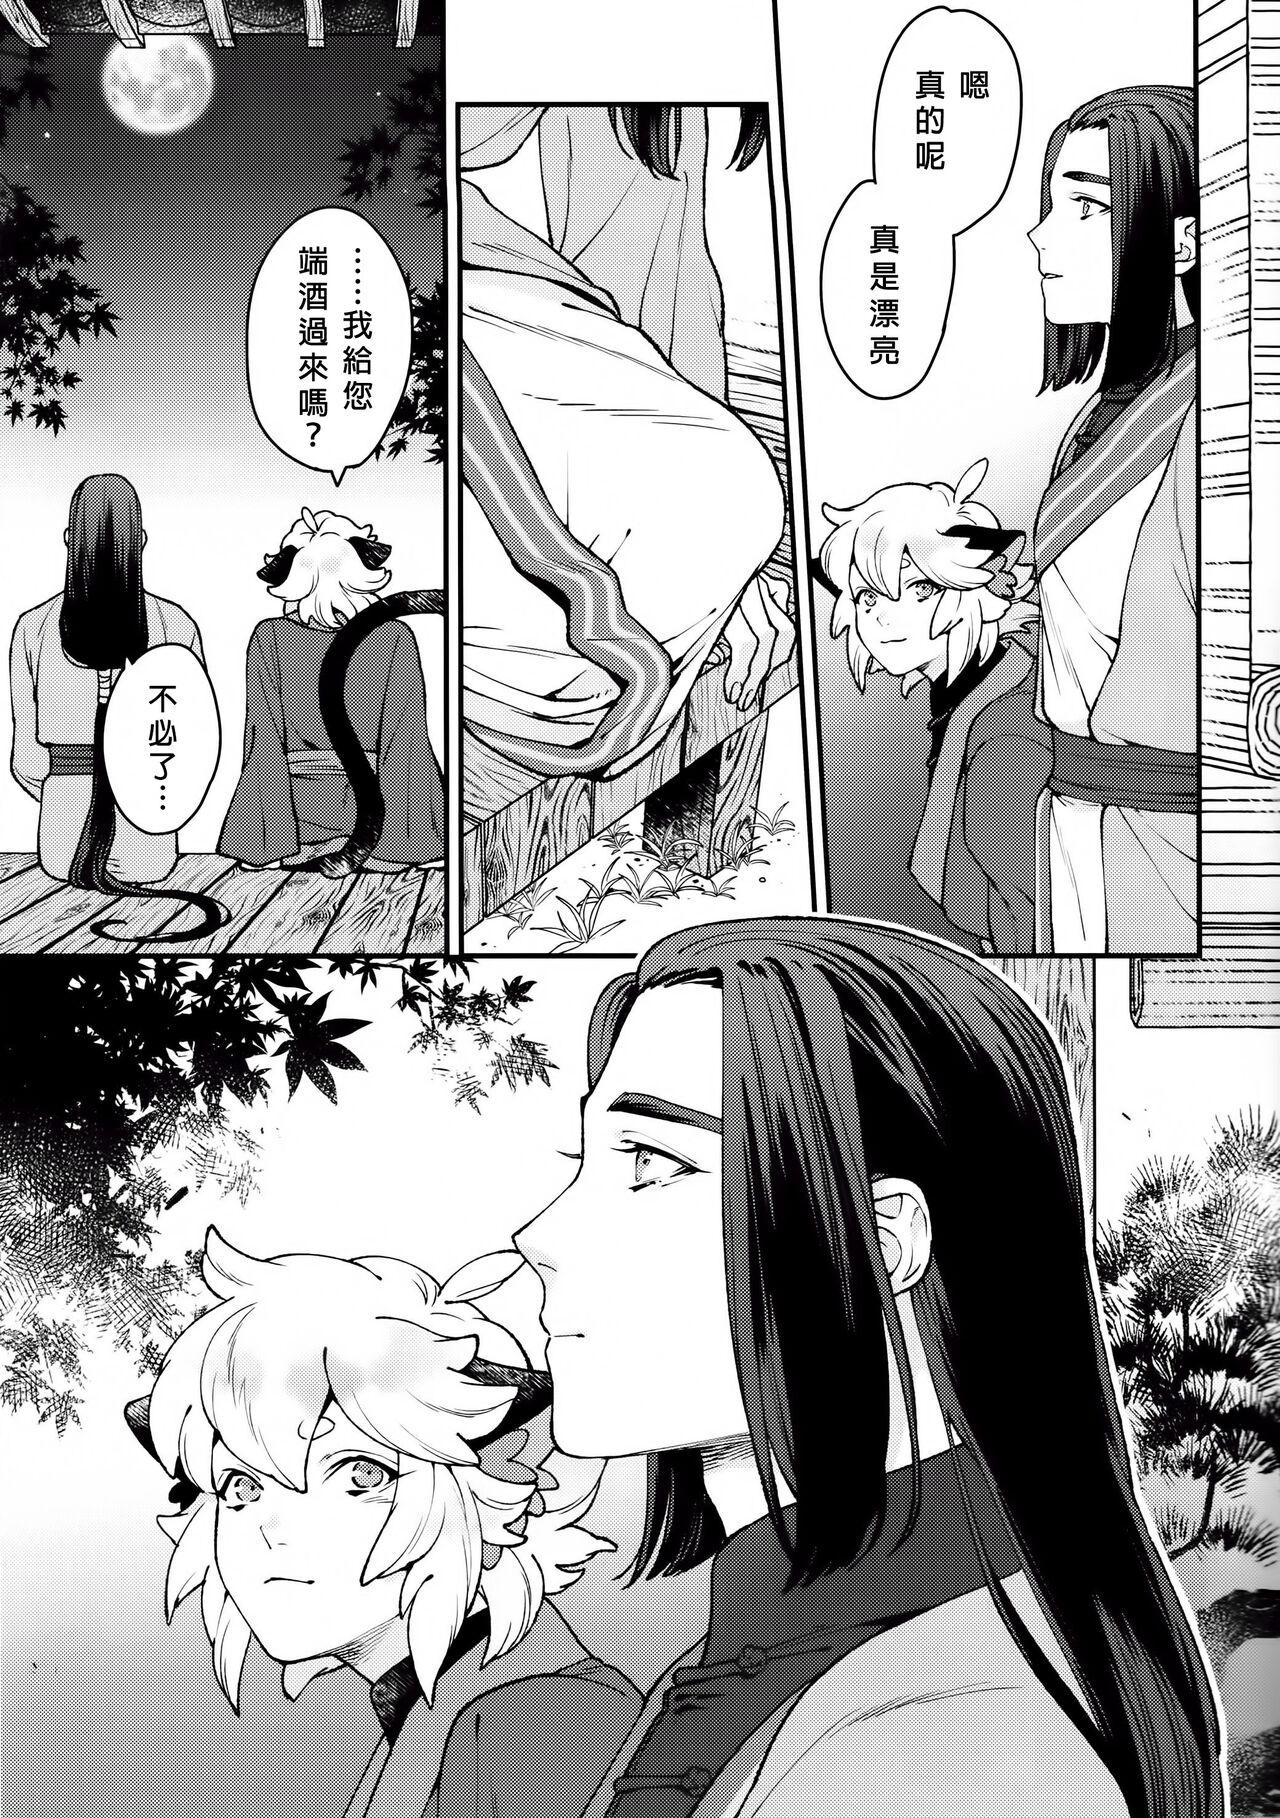 Best Blowjob Ever When the Hoar-frost falls|霜降之时 - The legend of luo xiaohei Cutie - Page 4